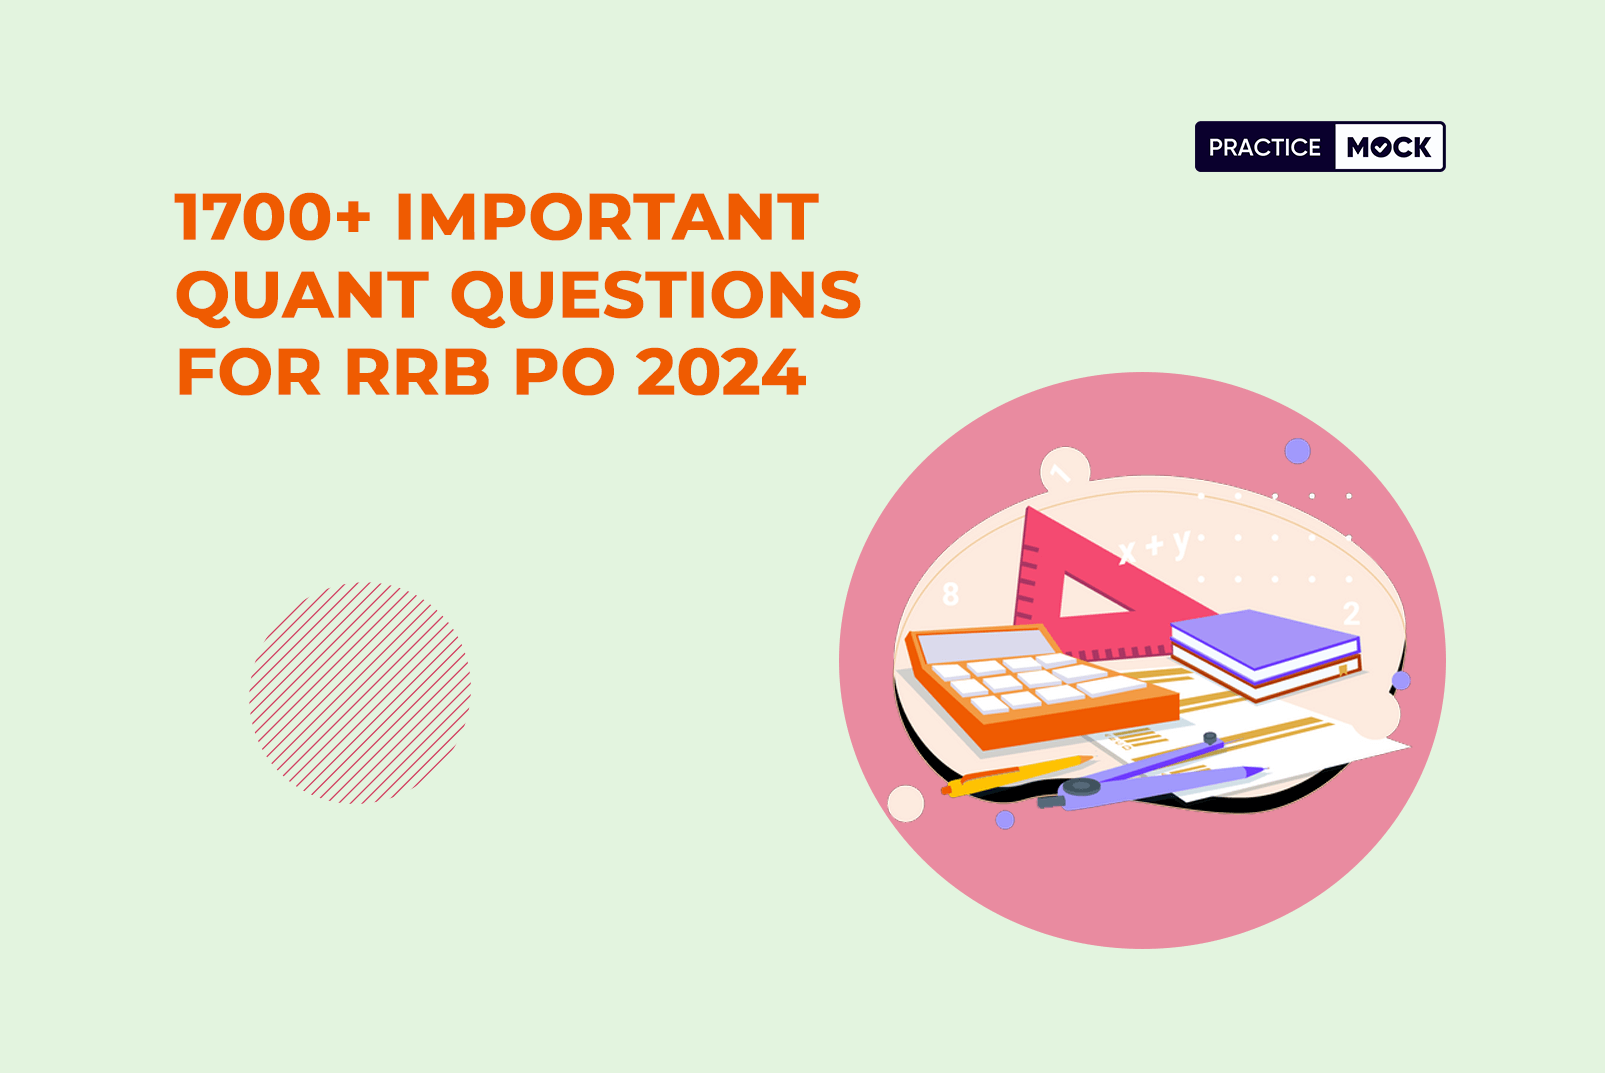 1700+ Important Quant Questions for RRB PO 2024